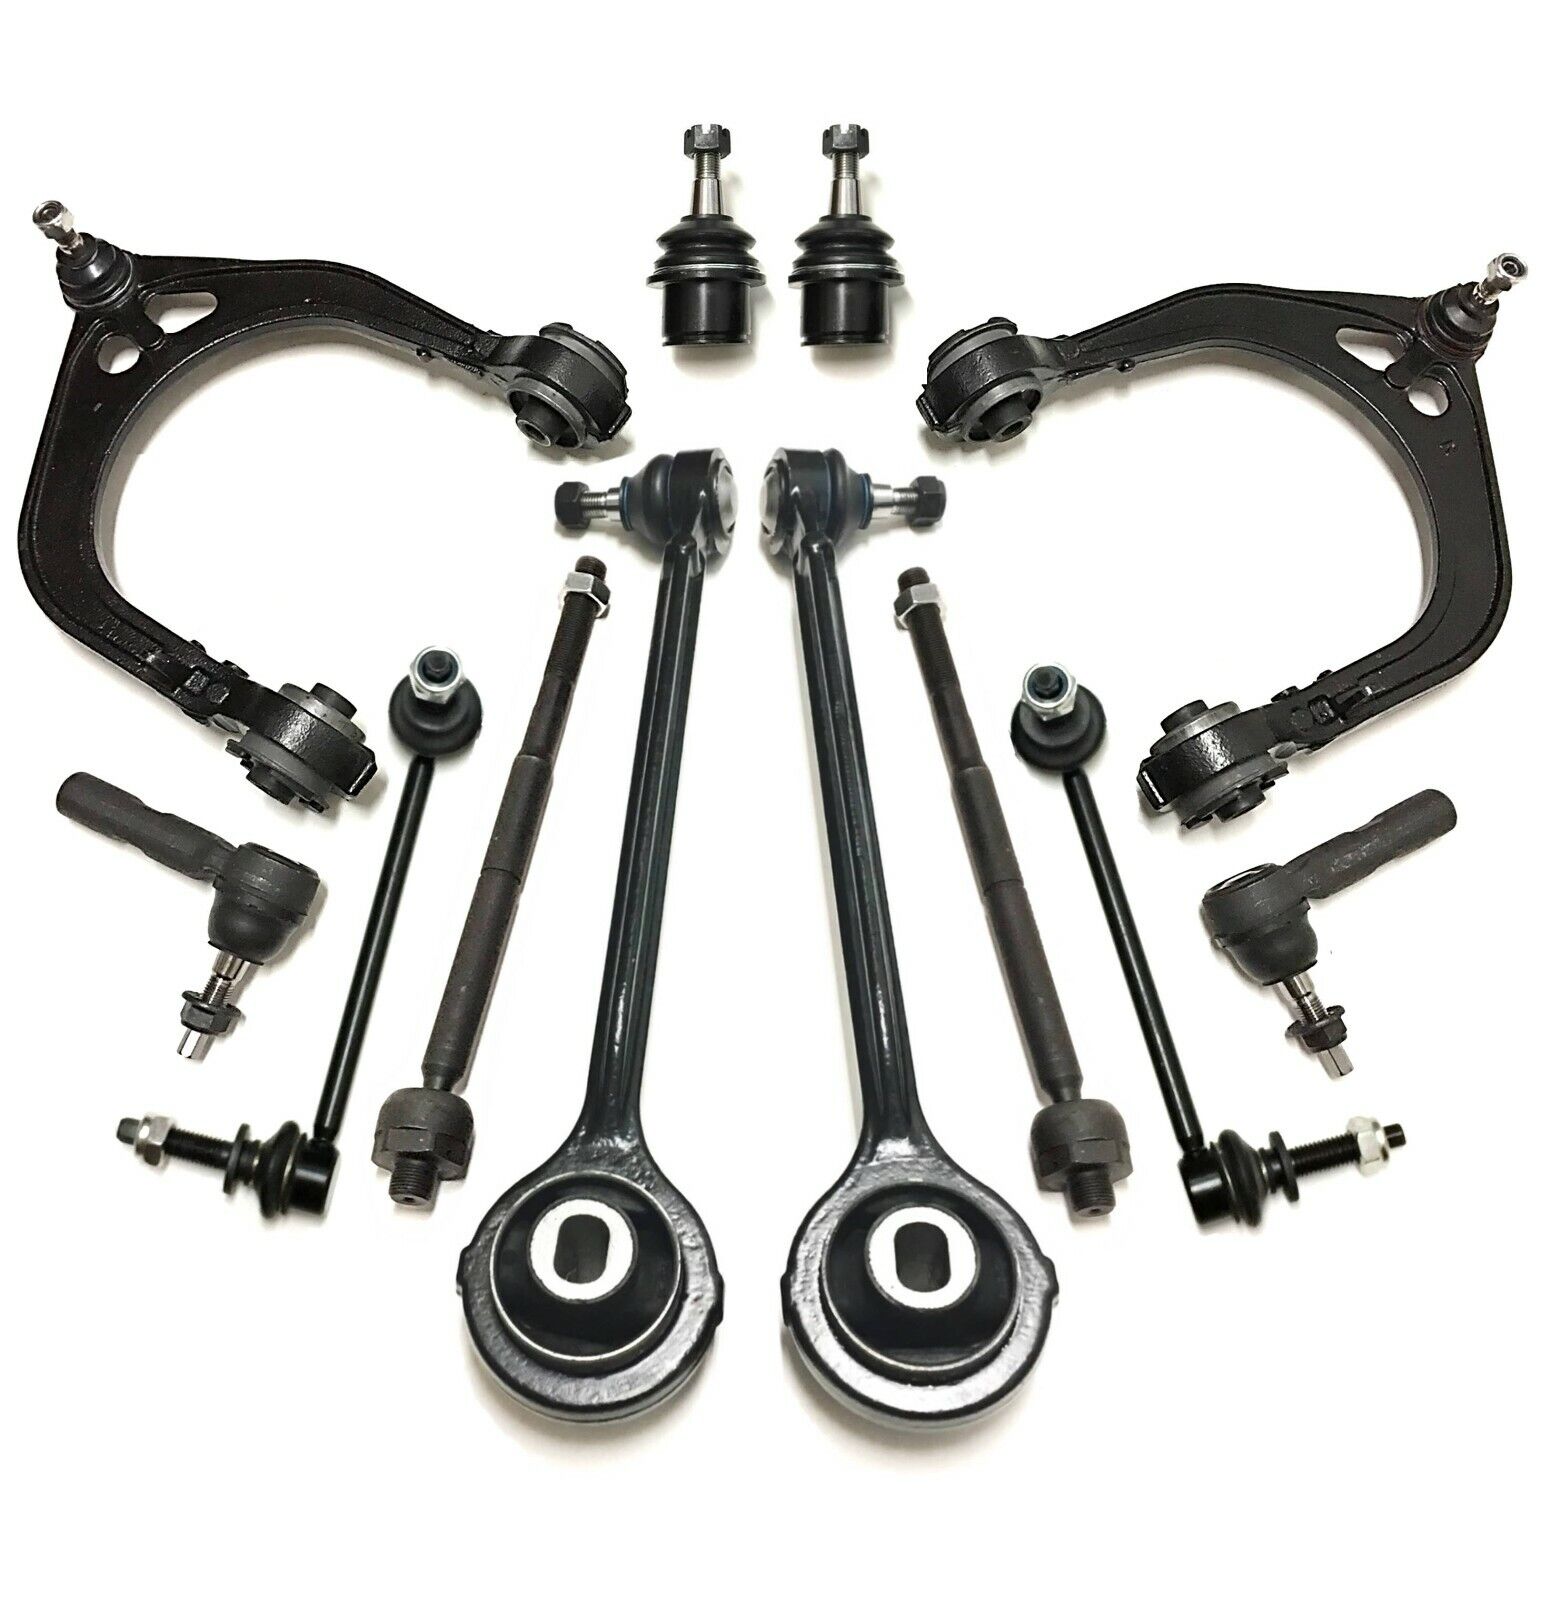 12Pc Control Arms Tie Rod Ends for Chrysler 300 Dodge Challenger Magnum Charger